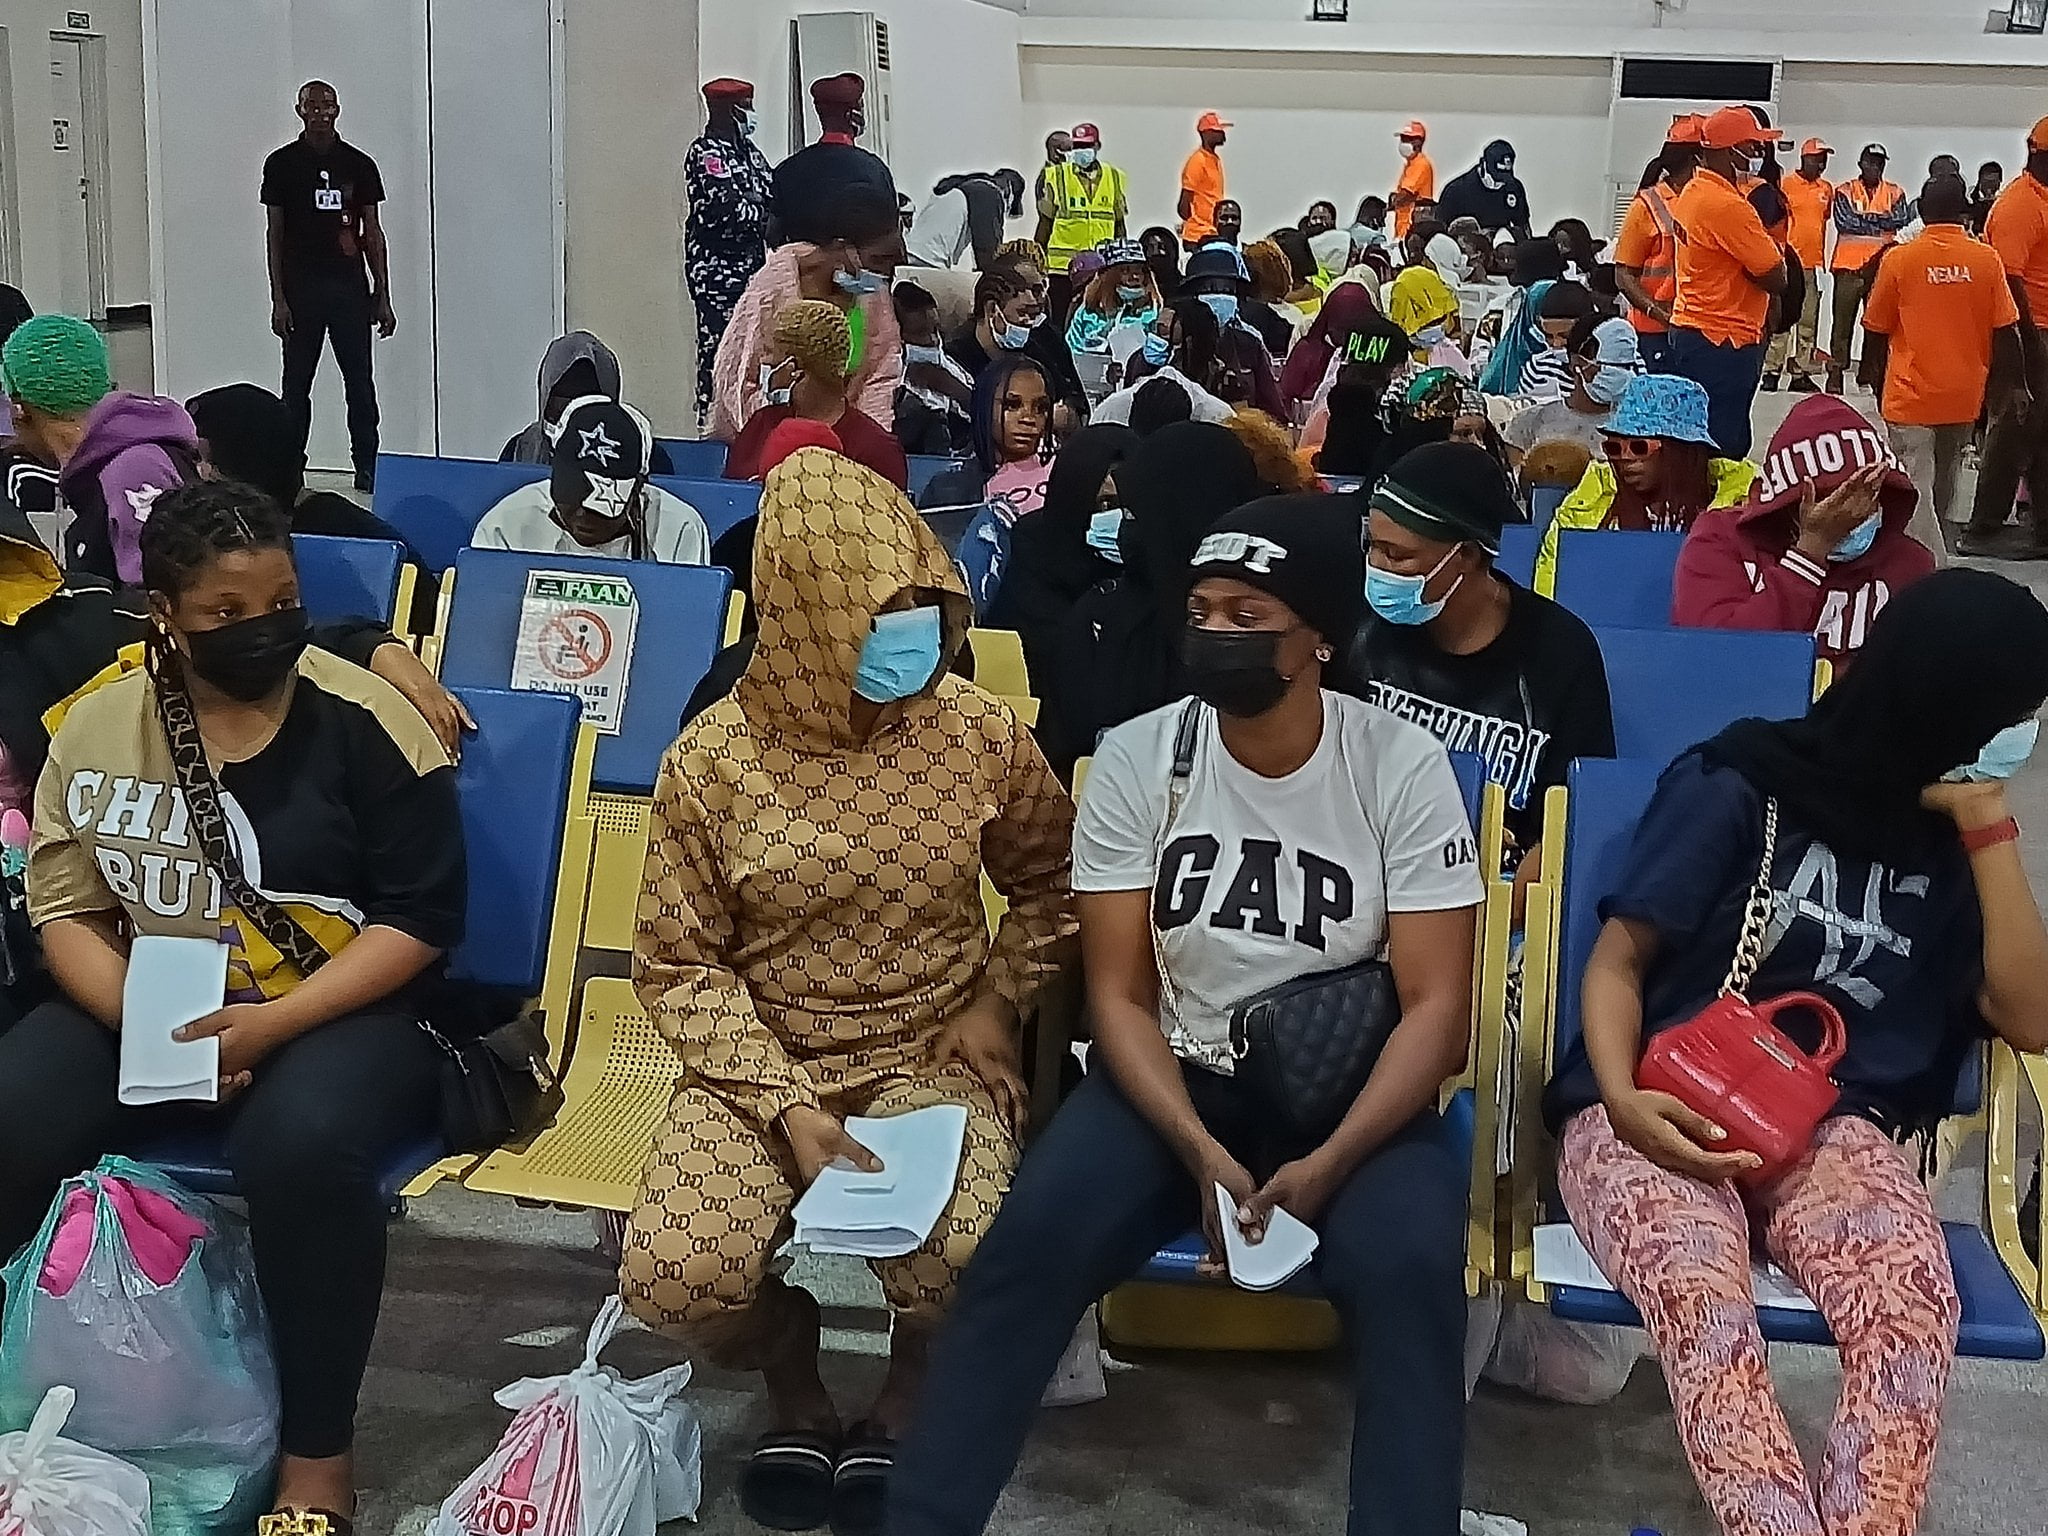 FG Rescues 542 stranded Nigerians from UAE after Visa ban [photos/video]